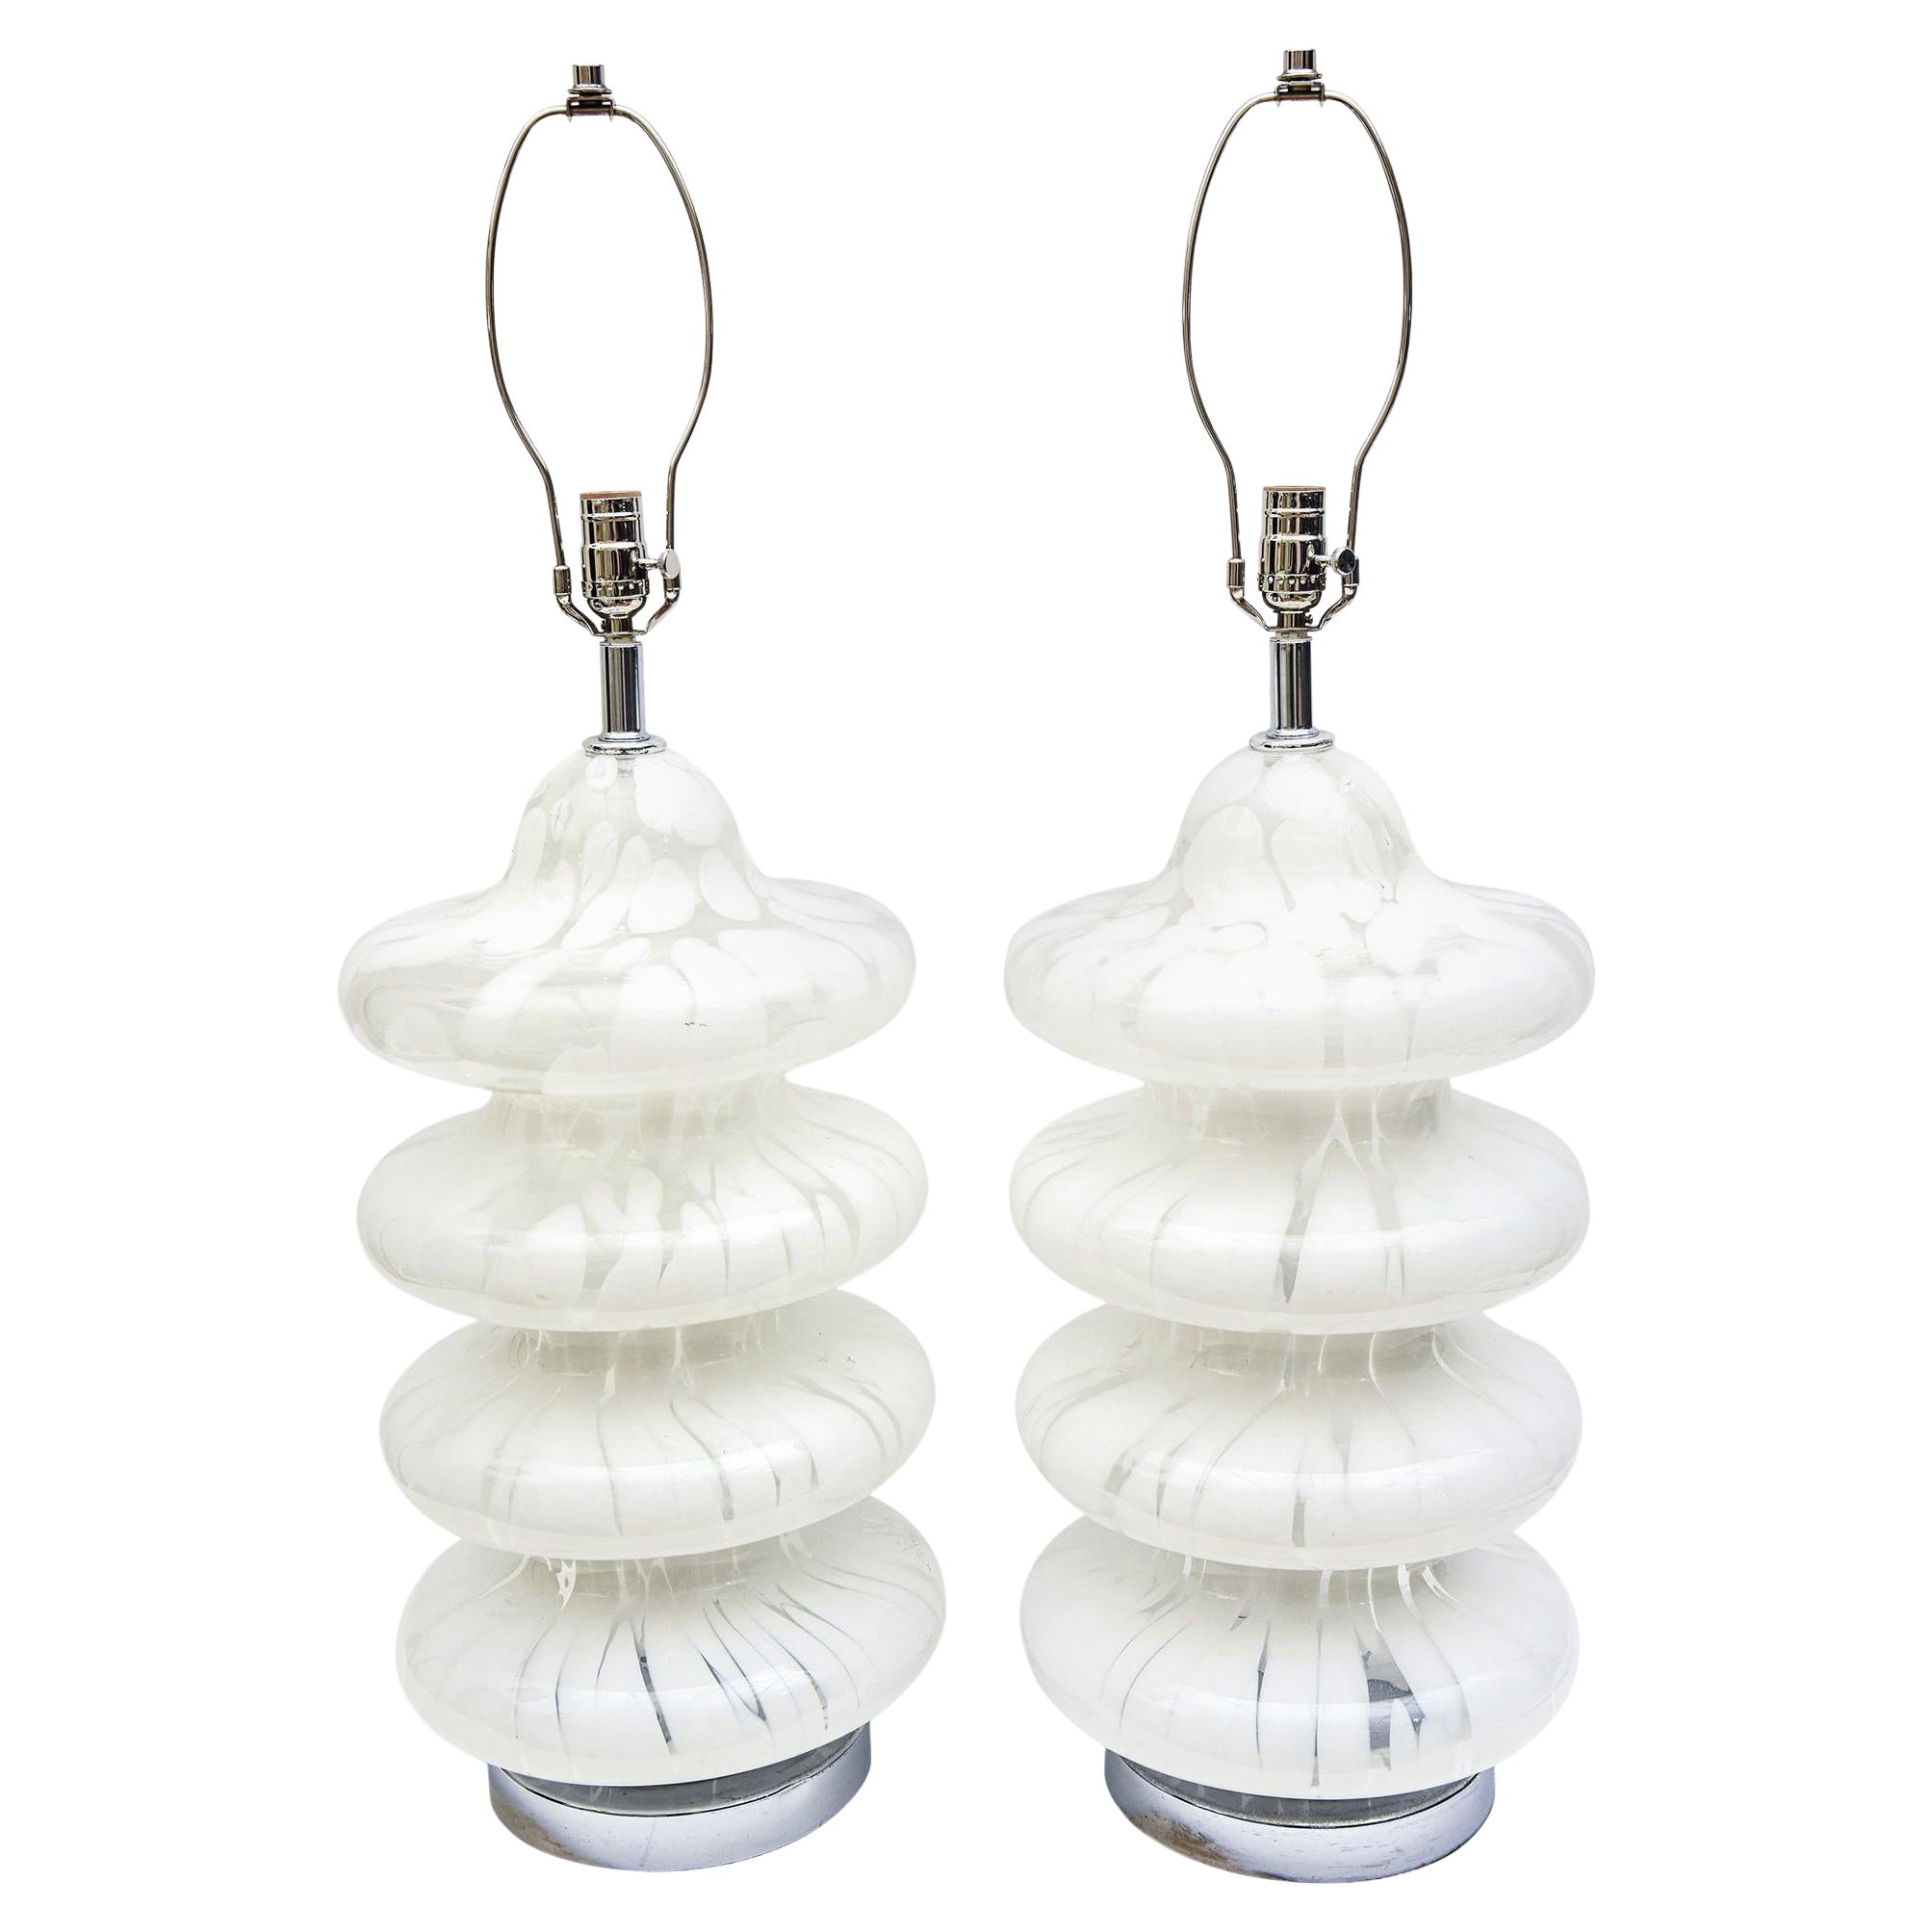 Carlo Nason for Mazzega Murano Vintage White Mottled Tiered Glass Lamps Pair